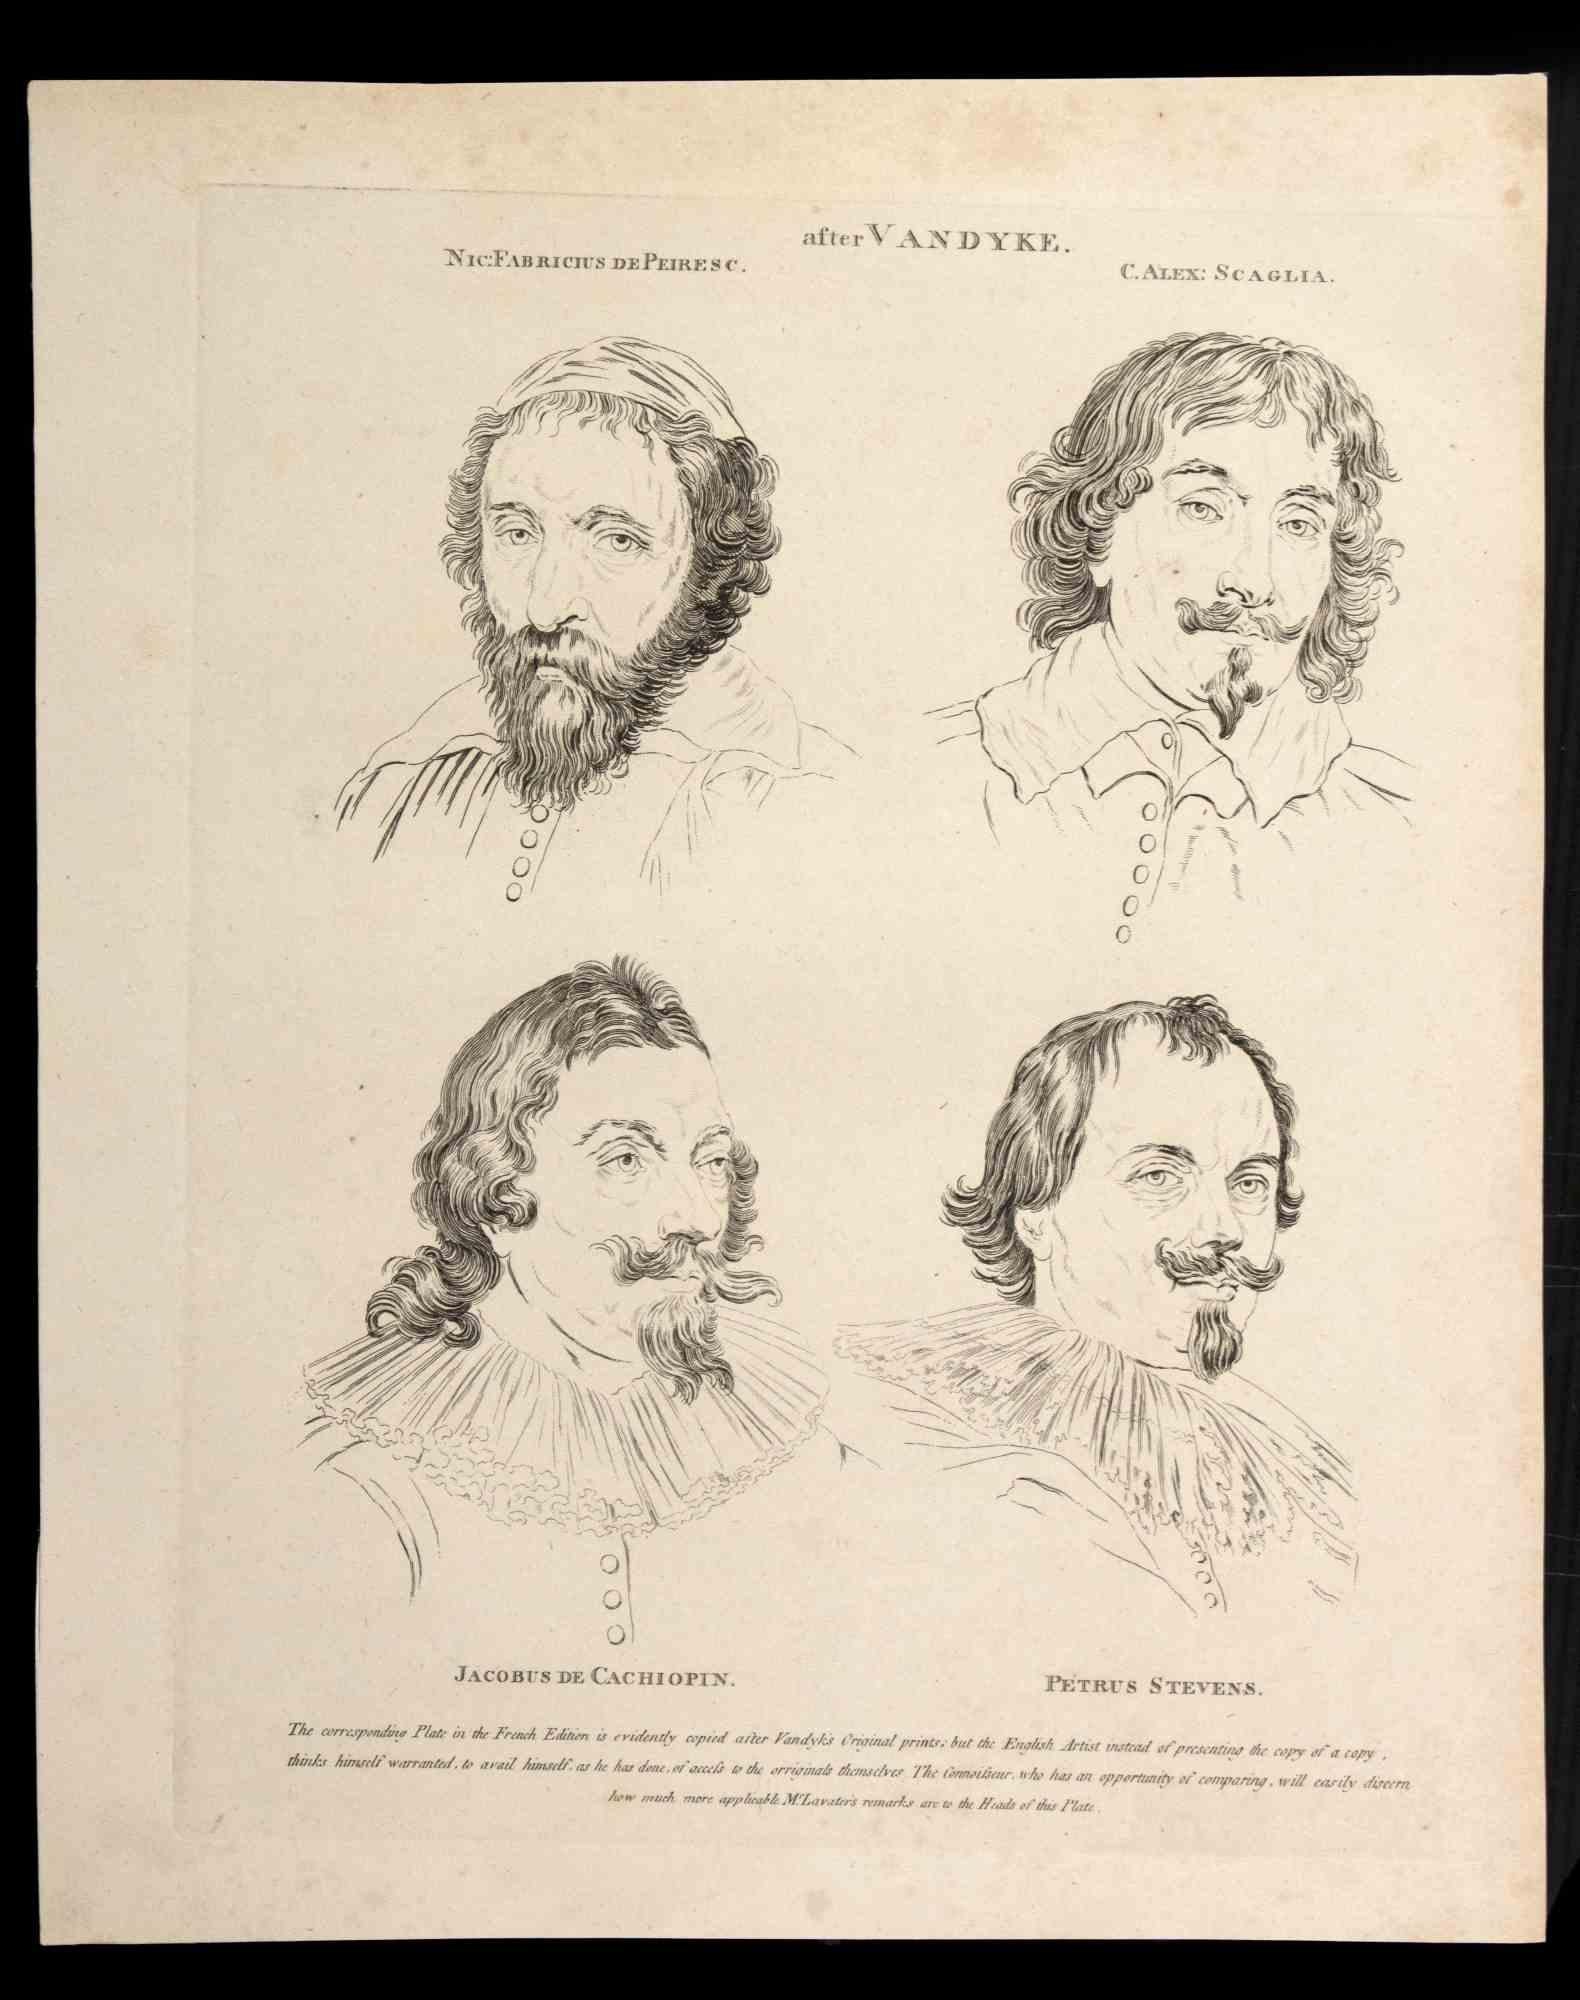 The portraits after Vandyke is an original etching artwork realized by Thomas Holloway for Johann Caspar Lavater's "Essays on Physiognomy, Designed to Promote the Knowledge and the Love of Mankind", London, Bensley, 1810. 

Title on the lower of